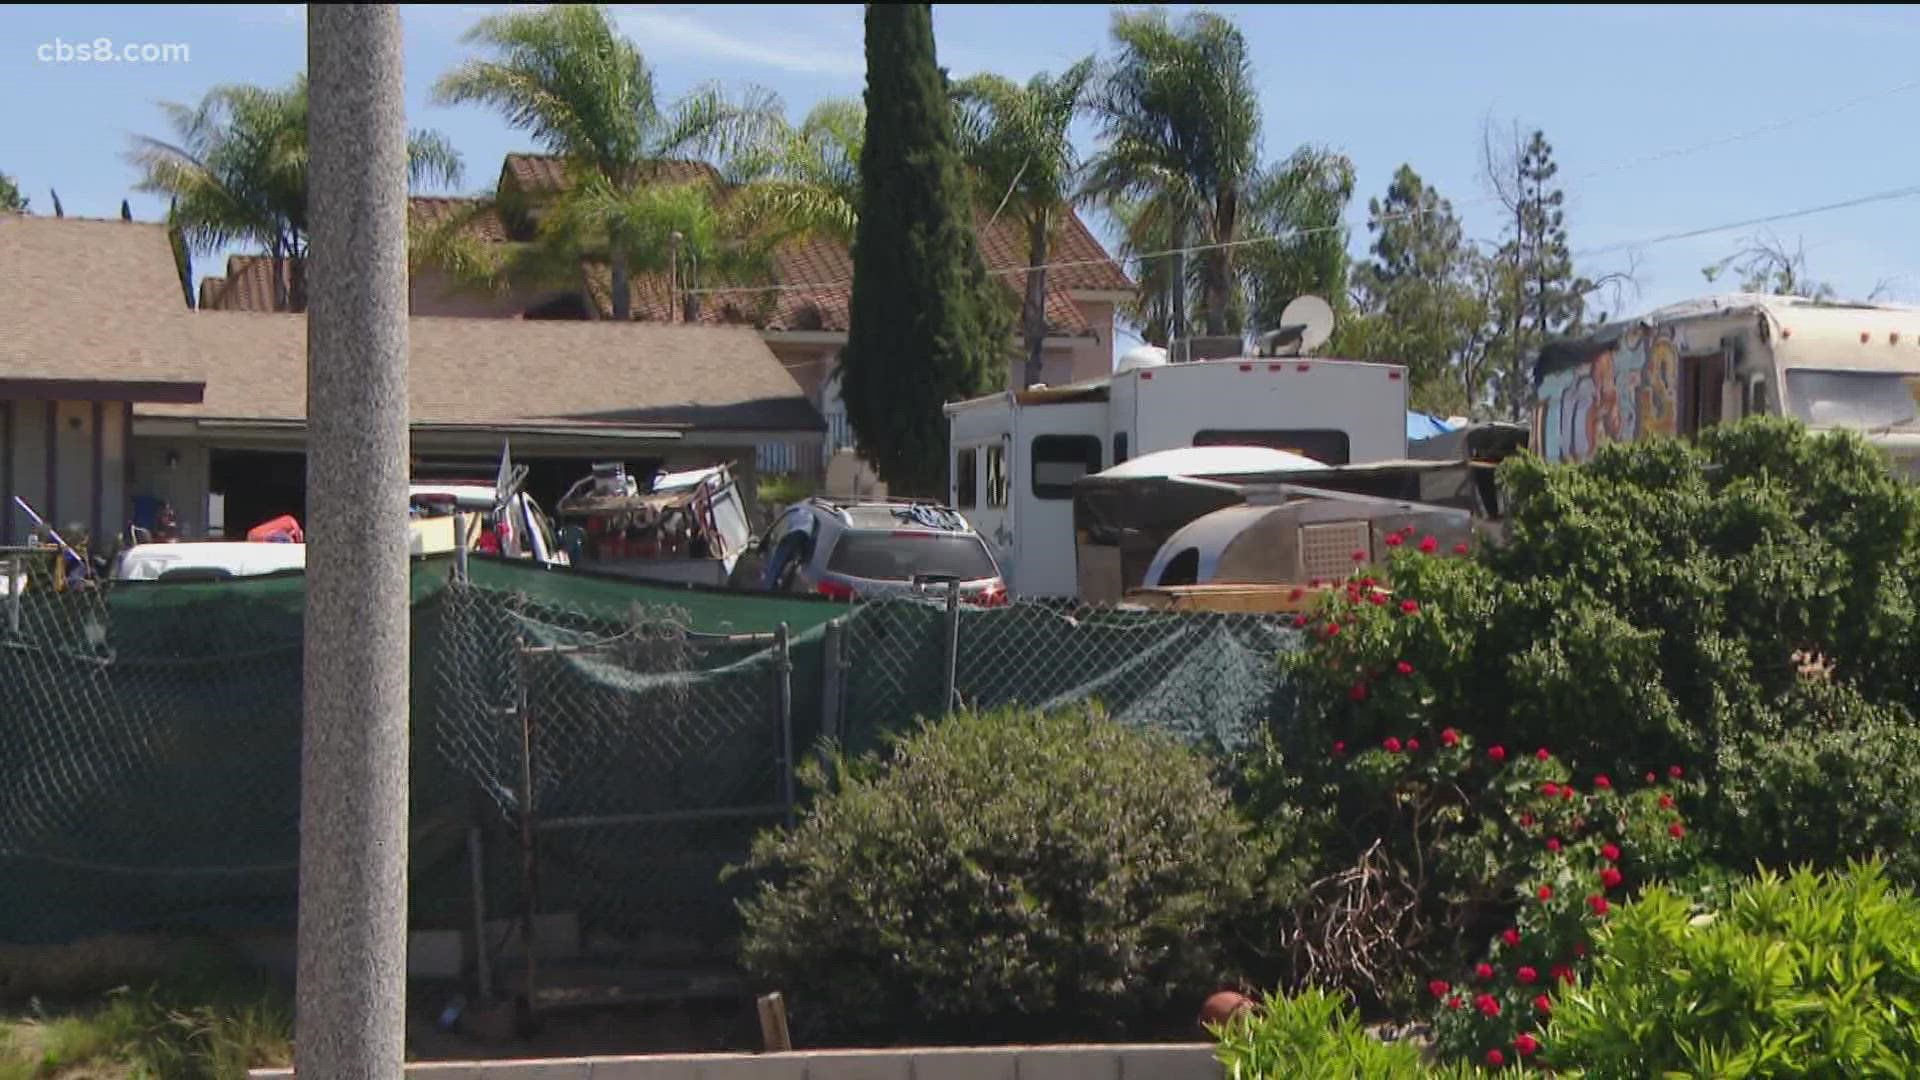 Squatters have taken over, and they say nothing is being done to force them out. The property is located on El Norte Parkway in Escondido.